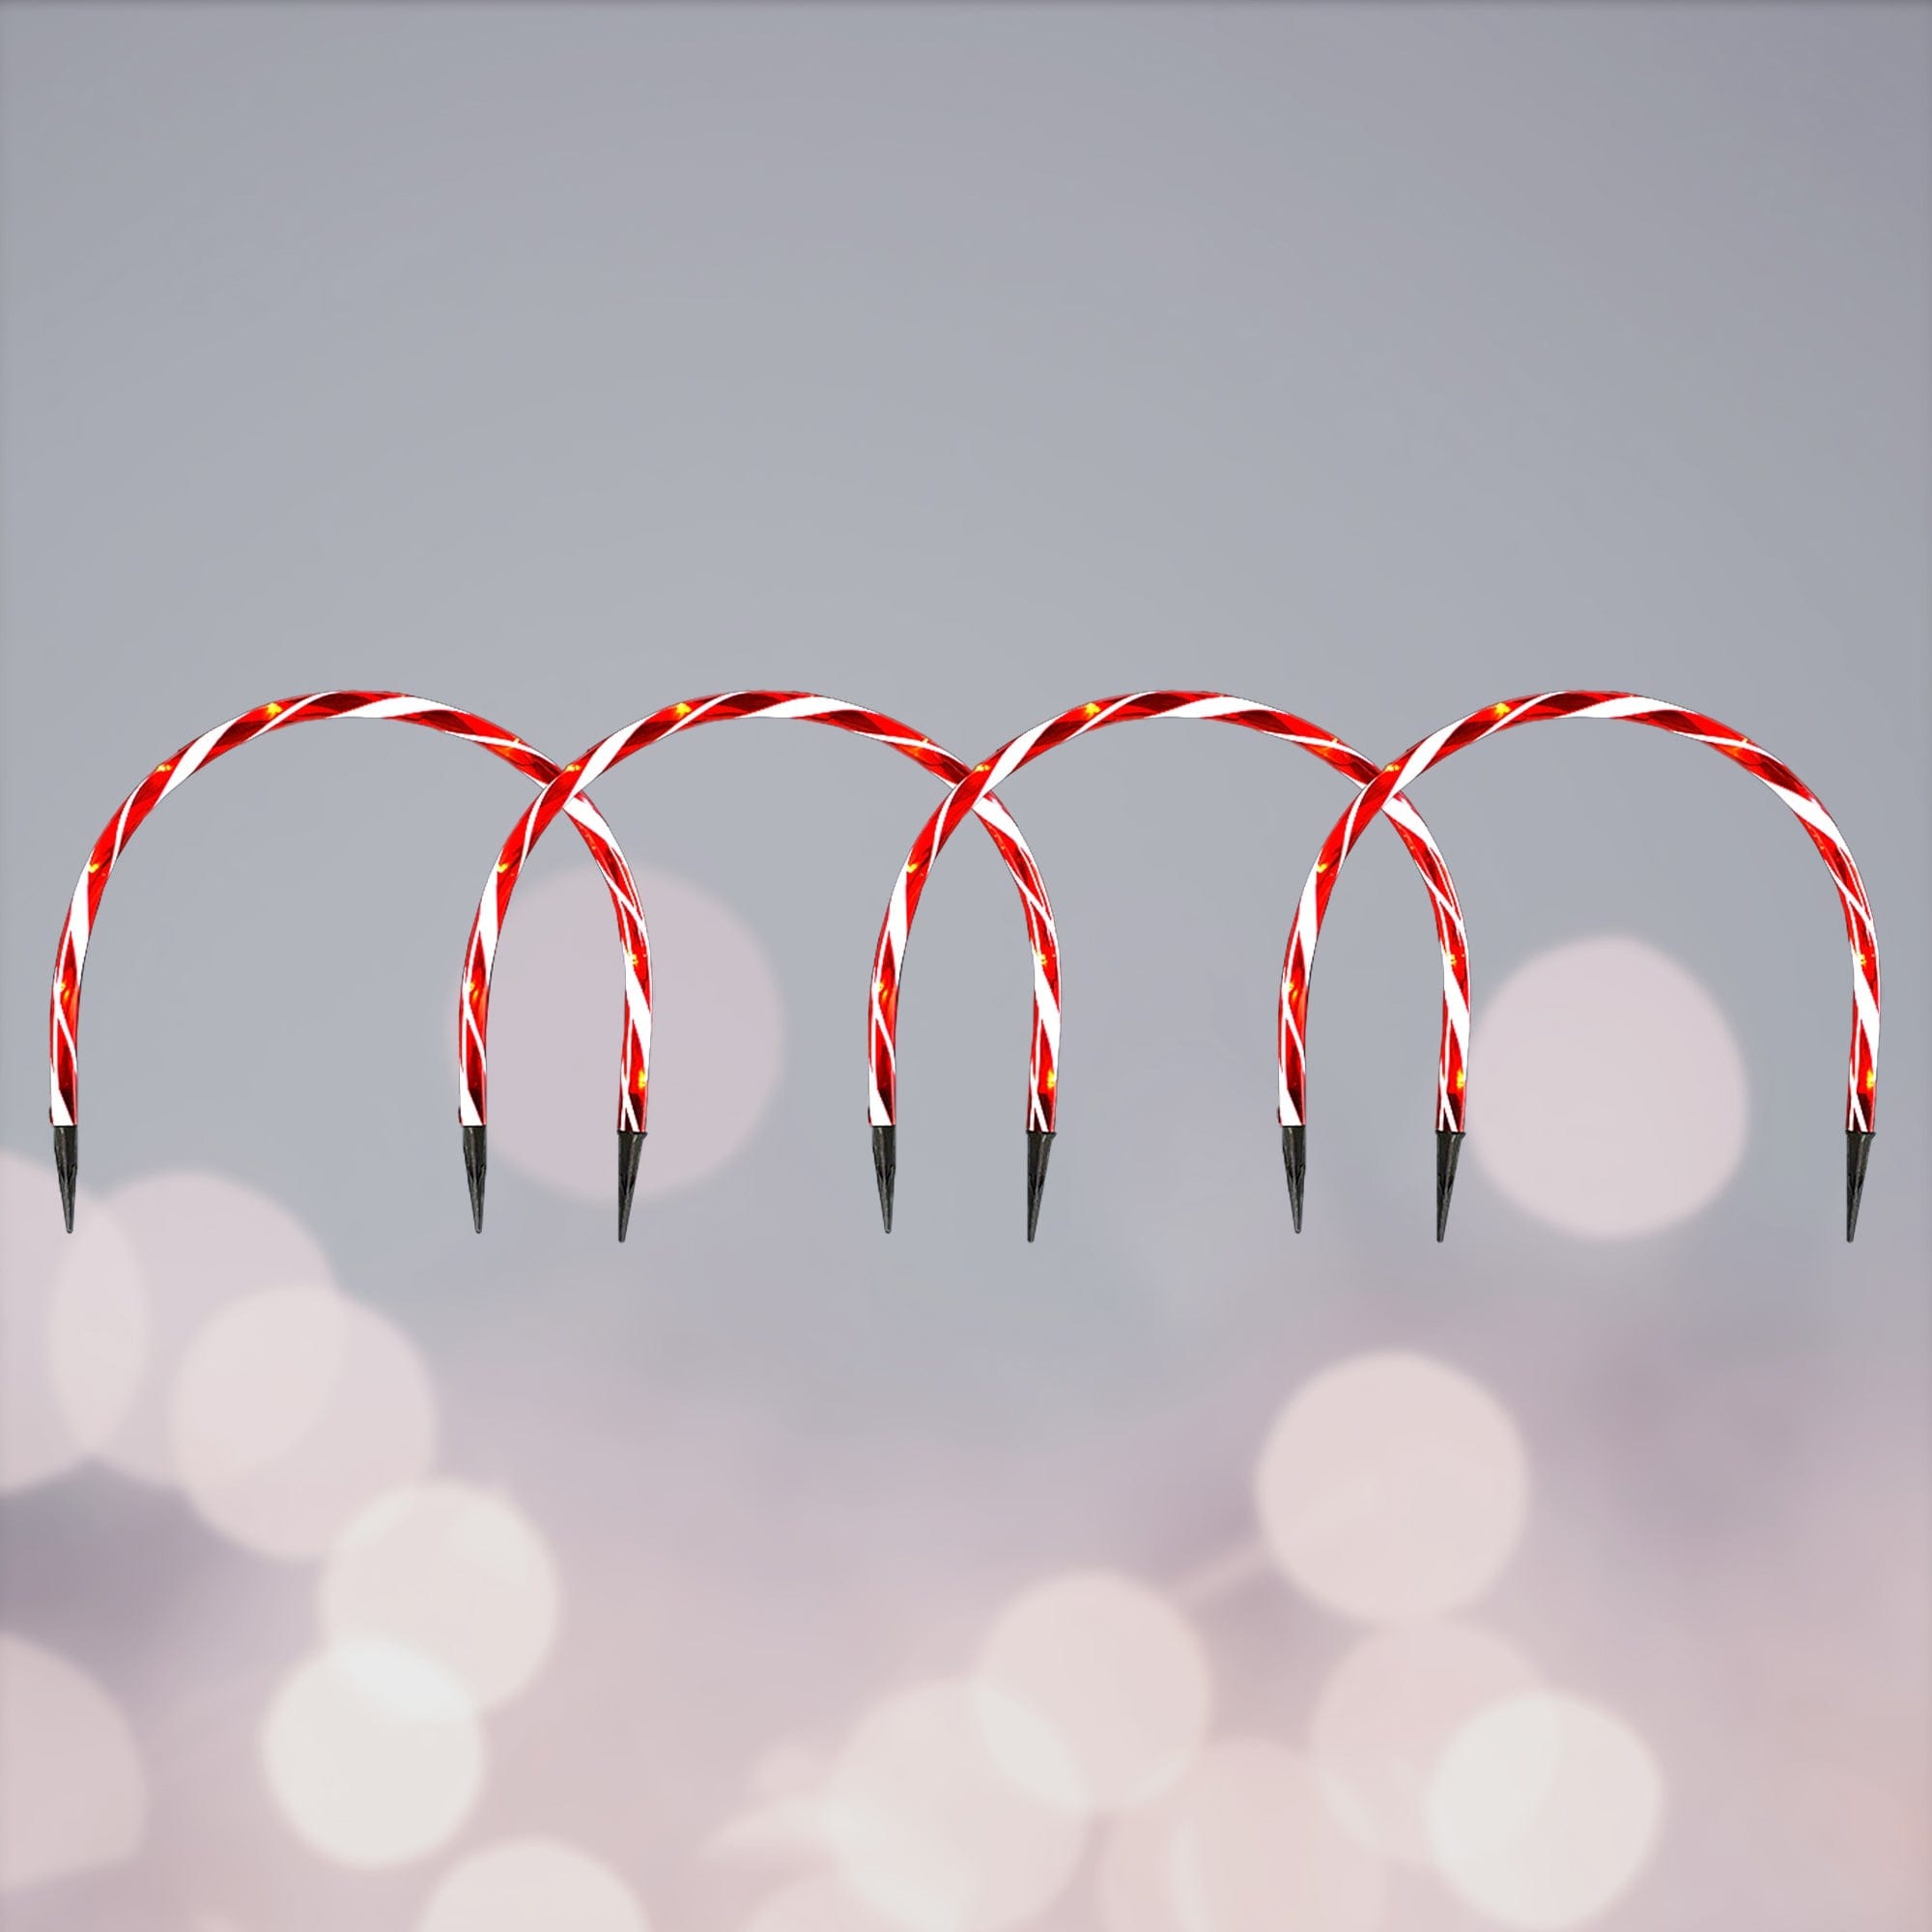 Lexi Lighting Christmas Path Light Red + White Set of 4 Arch Pathway Candy Cane Lights - 2 Colour Options LLPTH06-P